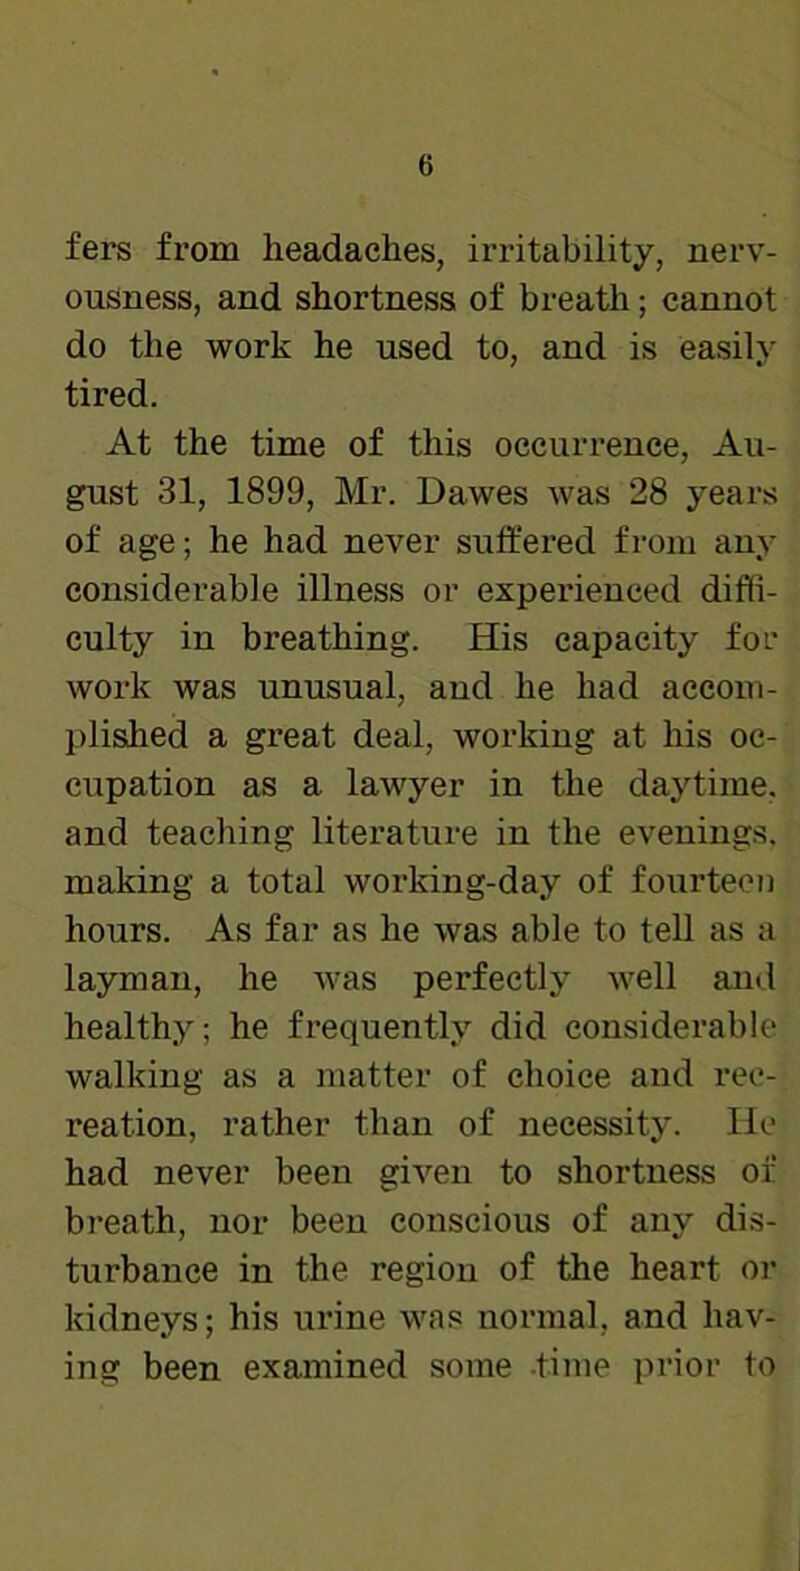 fers from headaches, irritability, nerv- ousness, and shortness of breath; cannot do the work he used to, and is easily tired. At the time of this occurrence, Au- gust 31, 1899, Mr. Dawes was 28 years of age; he had never suffered from any considerable illness or experienced diffi- culty in breathing. His capacity for work was unusual, and he had accom- plished a great deal, working at his oc- cupation as a lawyer in the daytime, and teaching literature in the evenings, making a total working-day of fourteen hours. As far as he was able to tell as a layman, he was perfectly well and healthy; he frequently did considerable walking as a matter of choice and rec- reation, rather than of necessity. He had never been given to shortness of breath, nor been conscious of any dis- turbance in the region of the heart or kidneys; his urine was normal, and hav- ing been examined some -time prior to